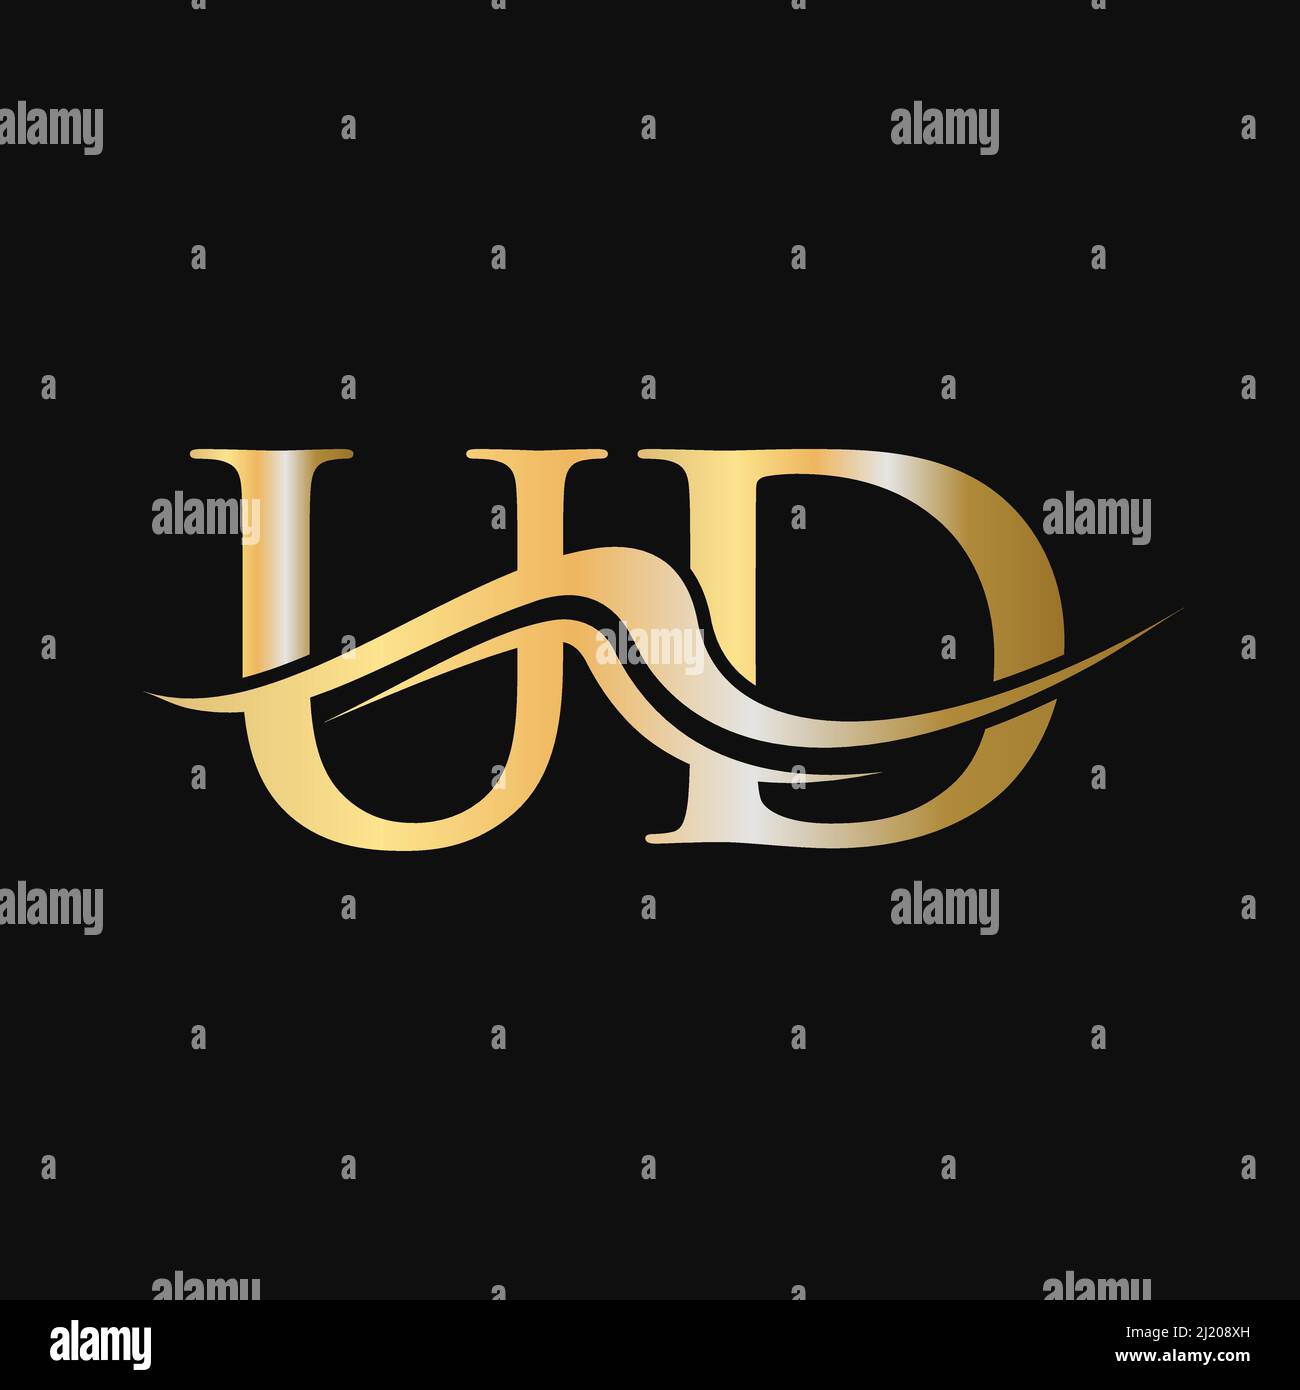 Letter UD Logo Design. Initial UD Logotype Template For Business And Company Logo Stock Vector